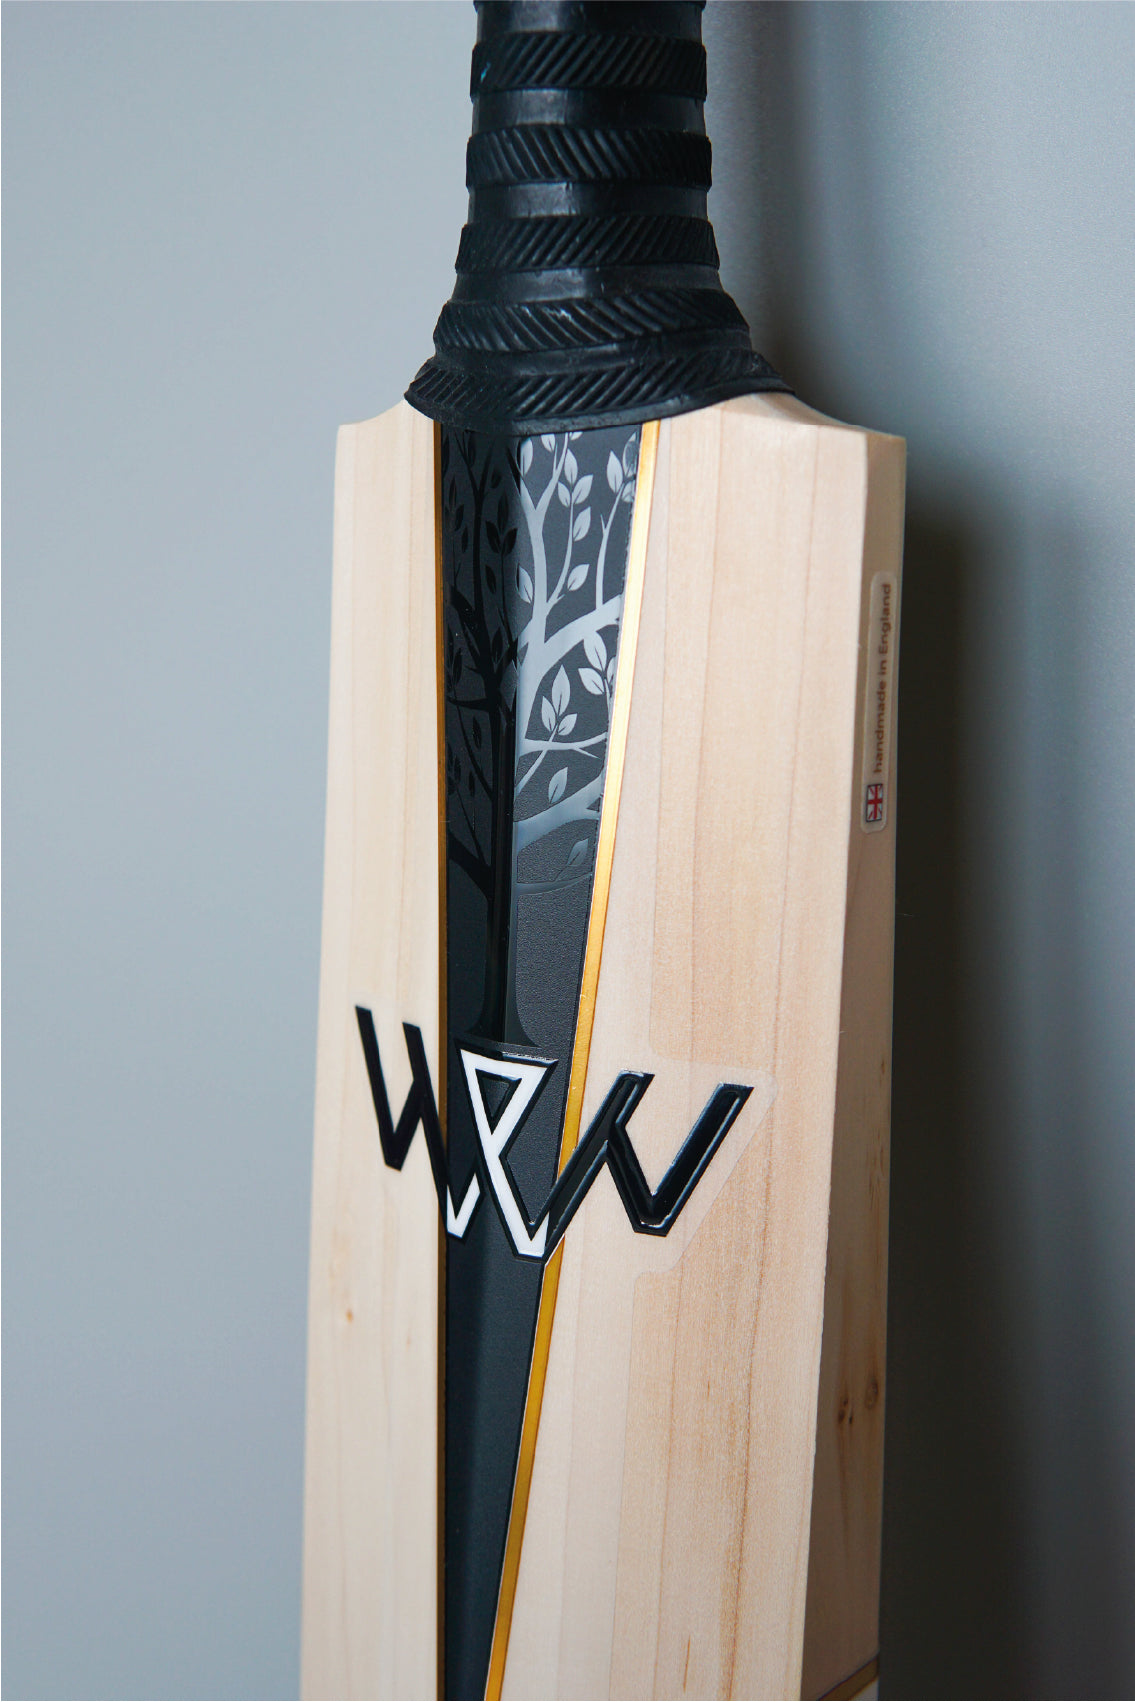 Each Willow Twin Nyx is individually handmade, with CNC-free manufacturing and individual in-house pressing and processing from cleft to bat